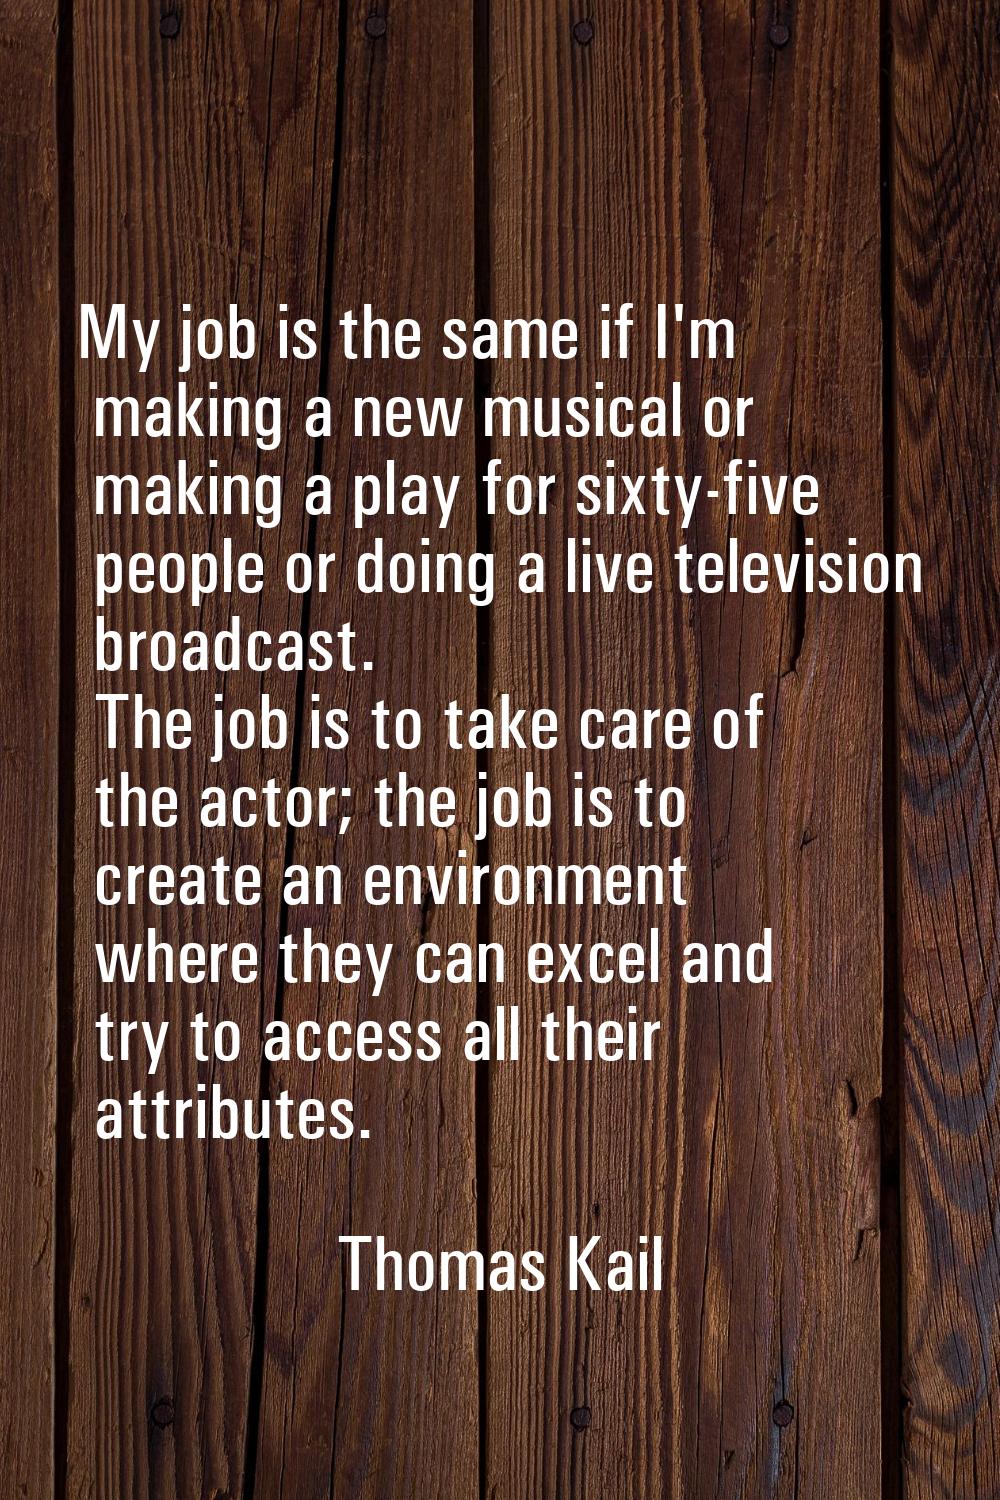 My job is the same if I'm making a new musical or making a play for sixty-five people or doing a li